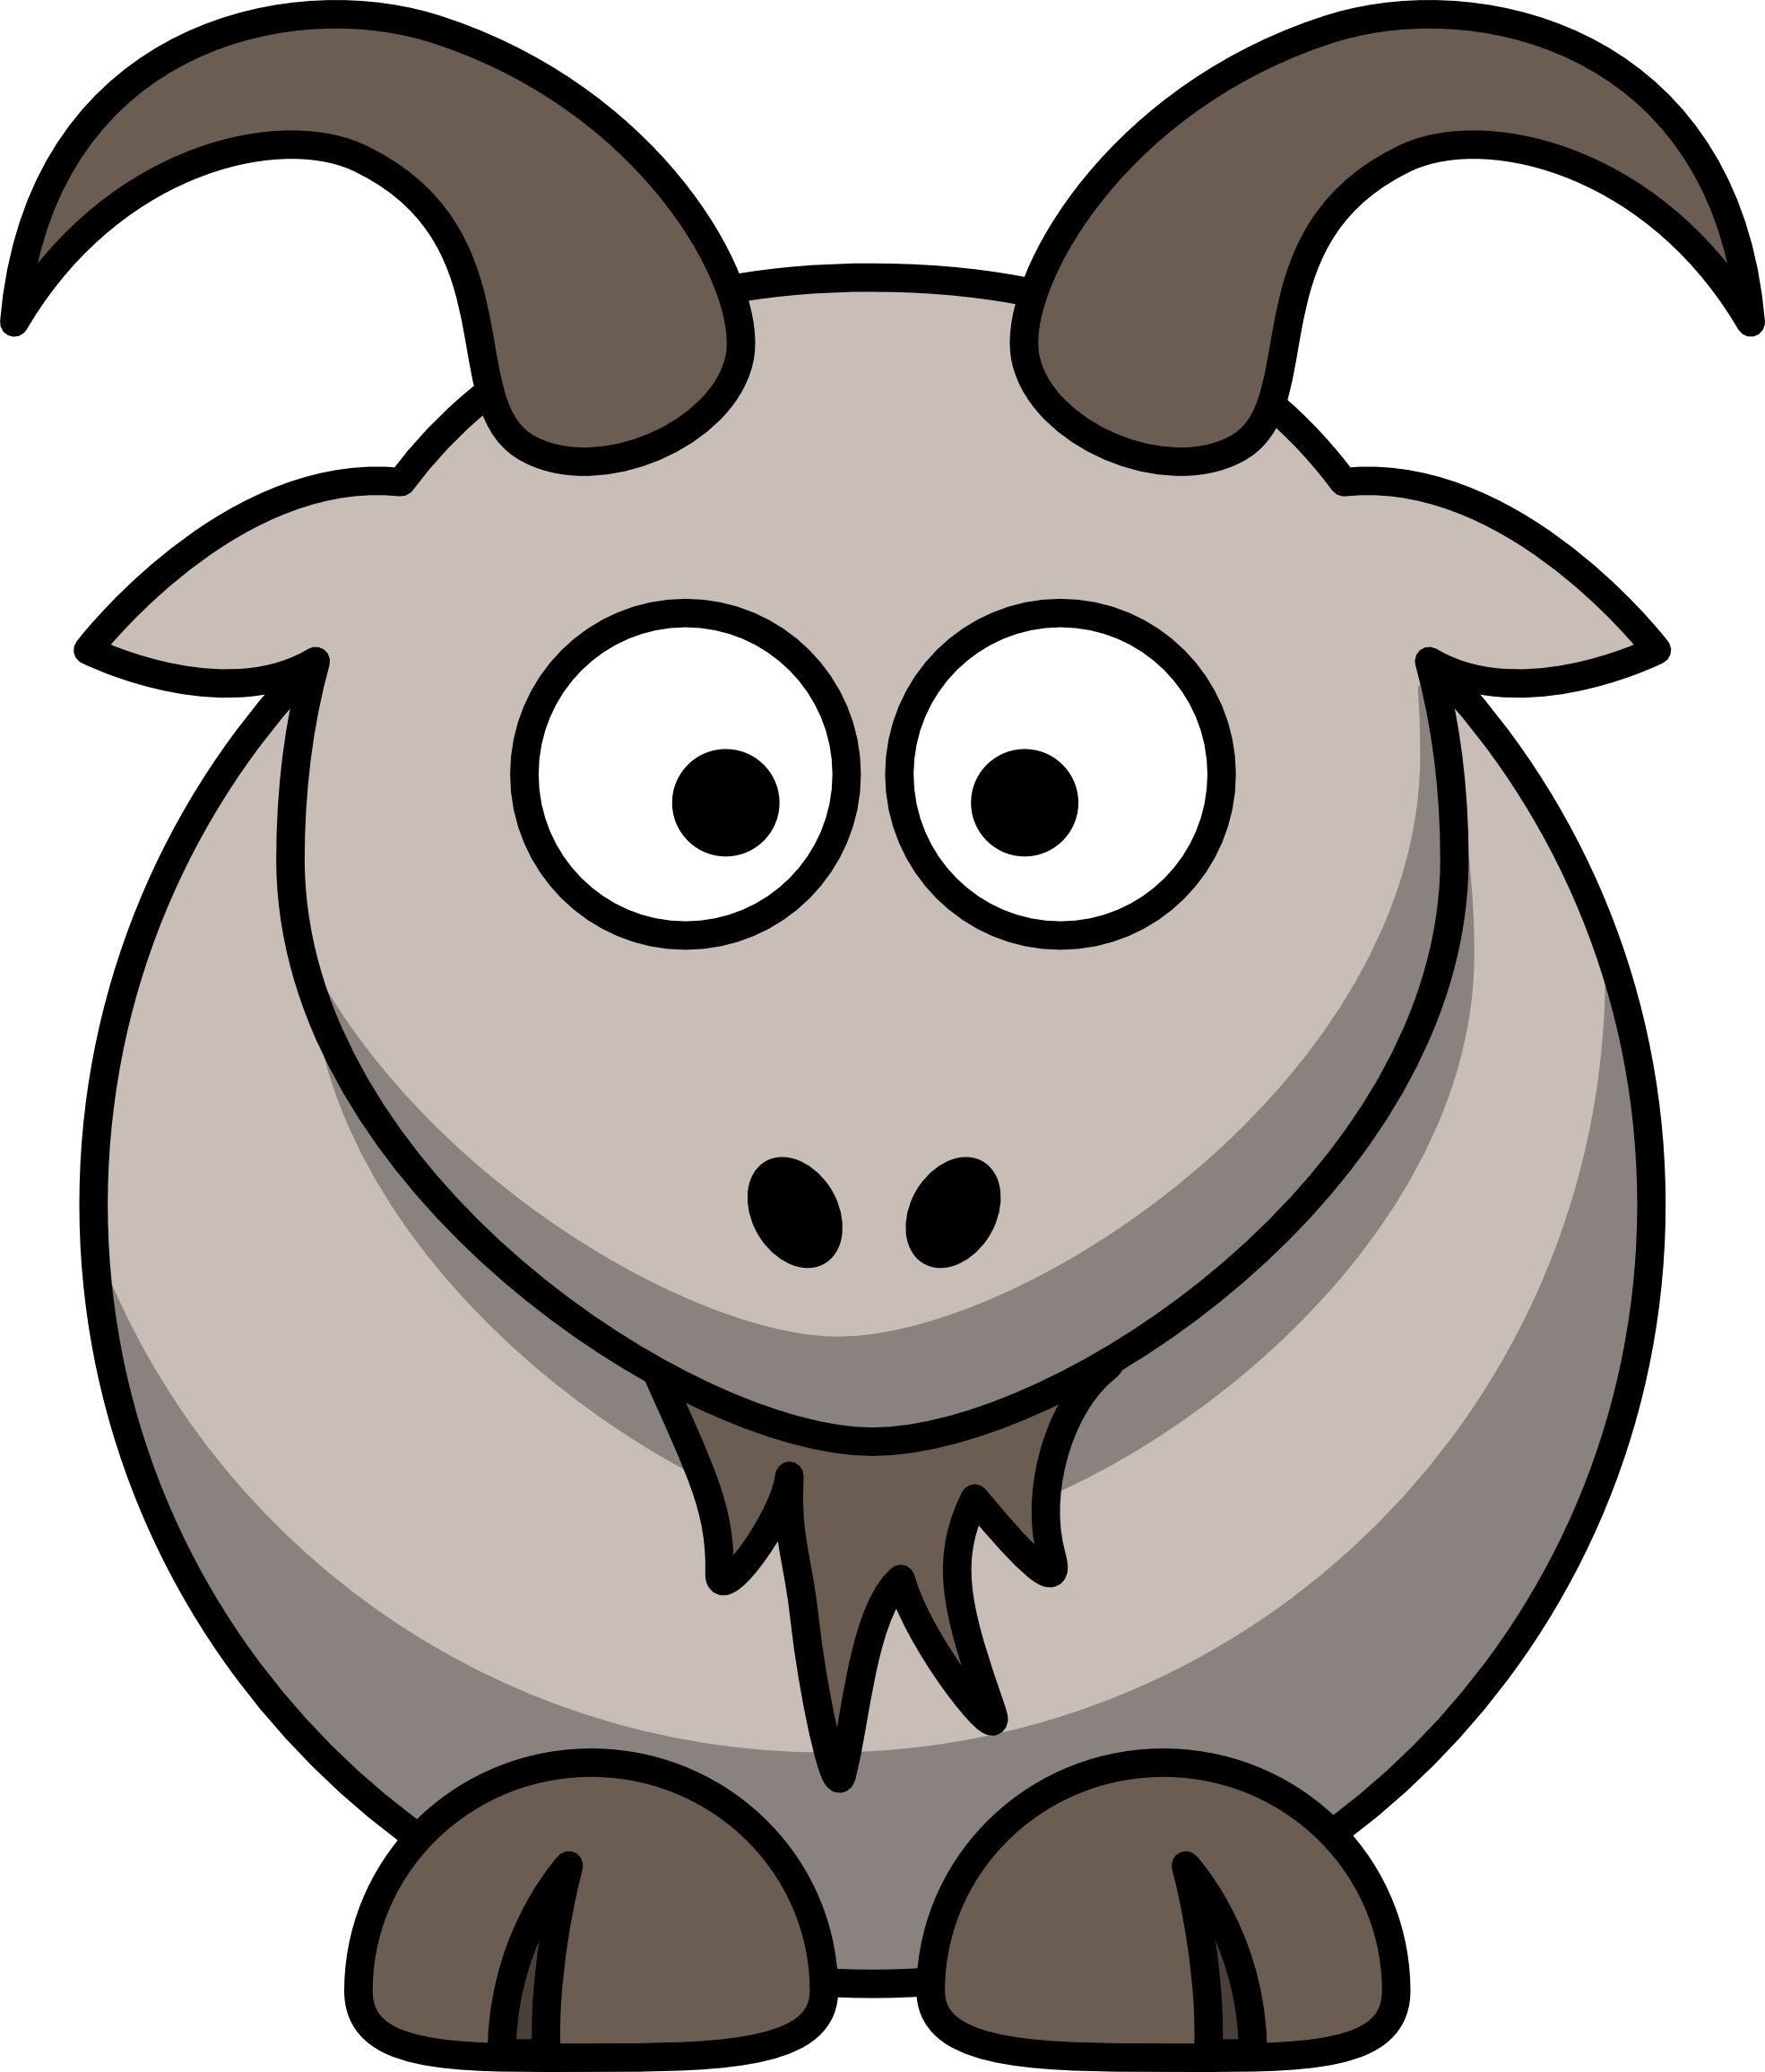 Panda free images. Goat clipart toon